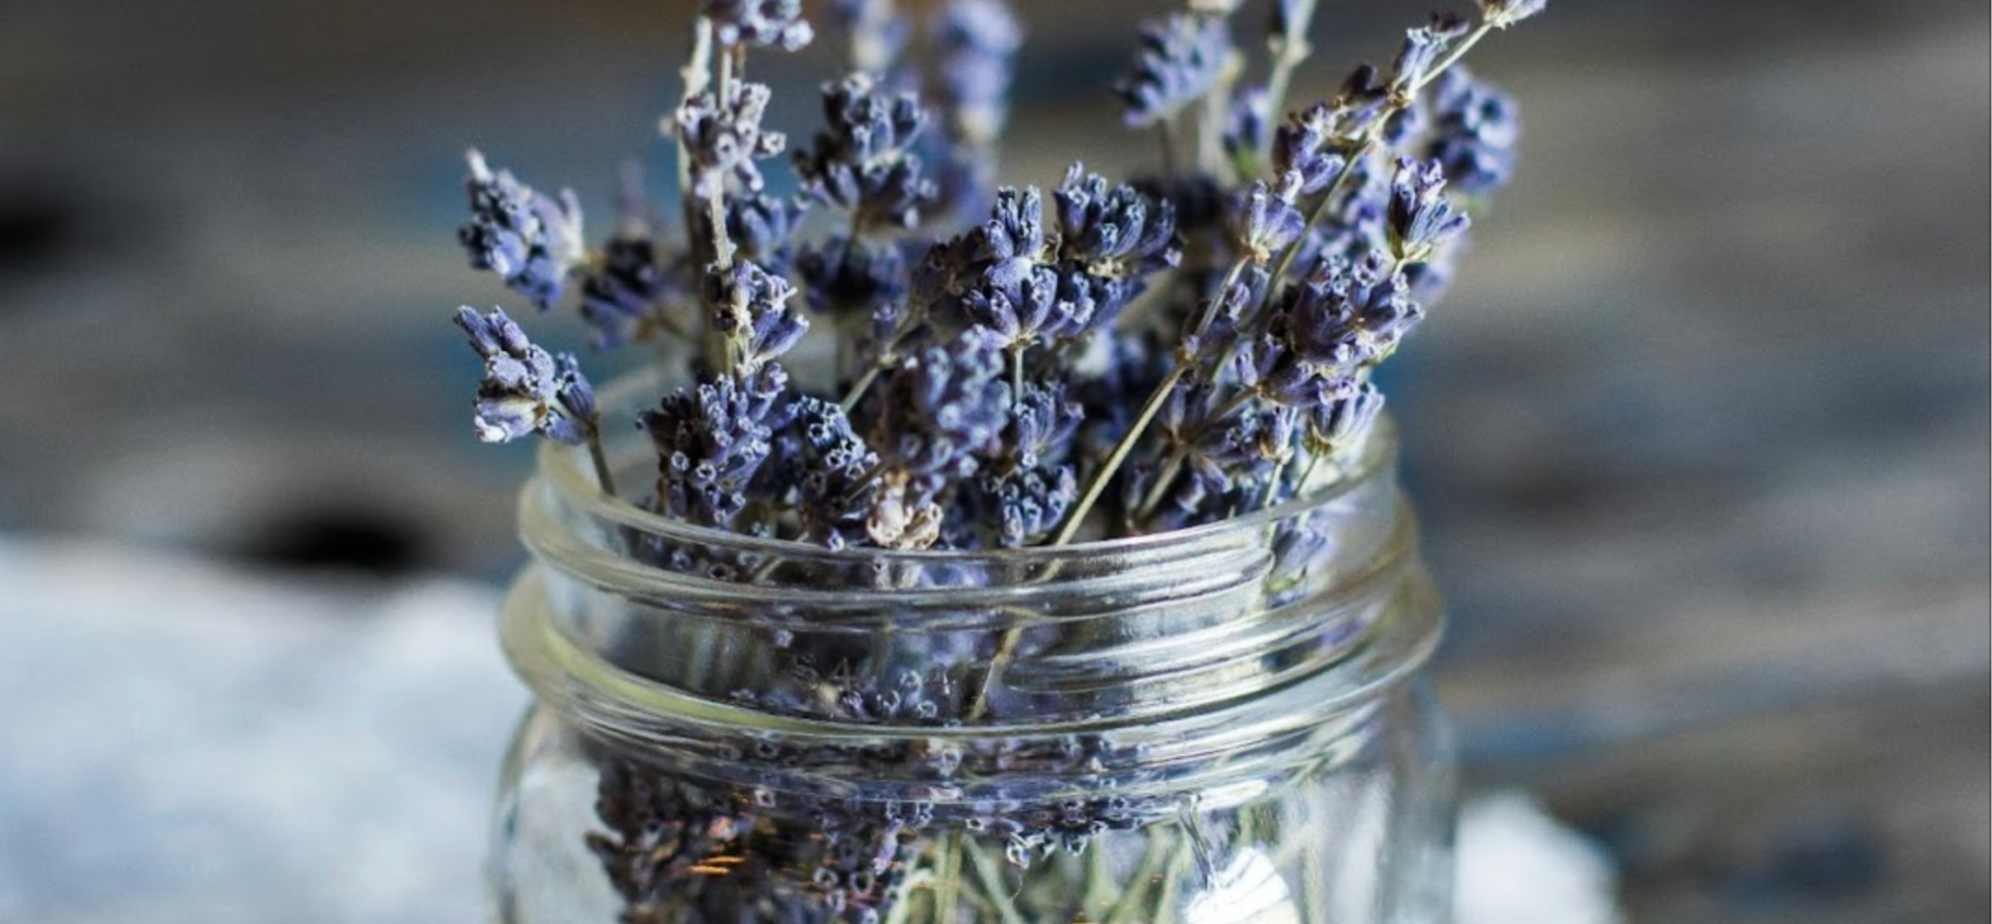 Dried lavender flowers in a glass jar